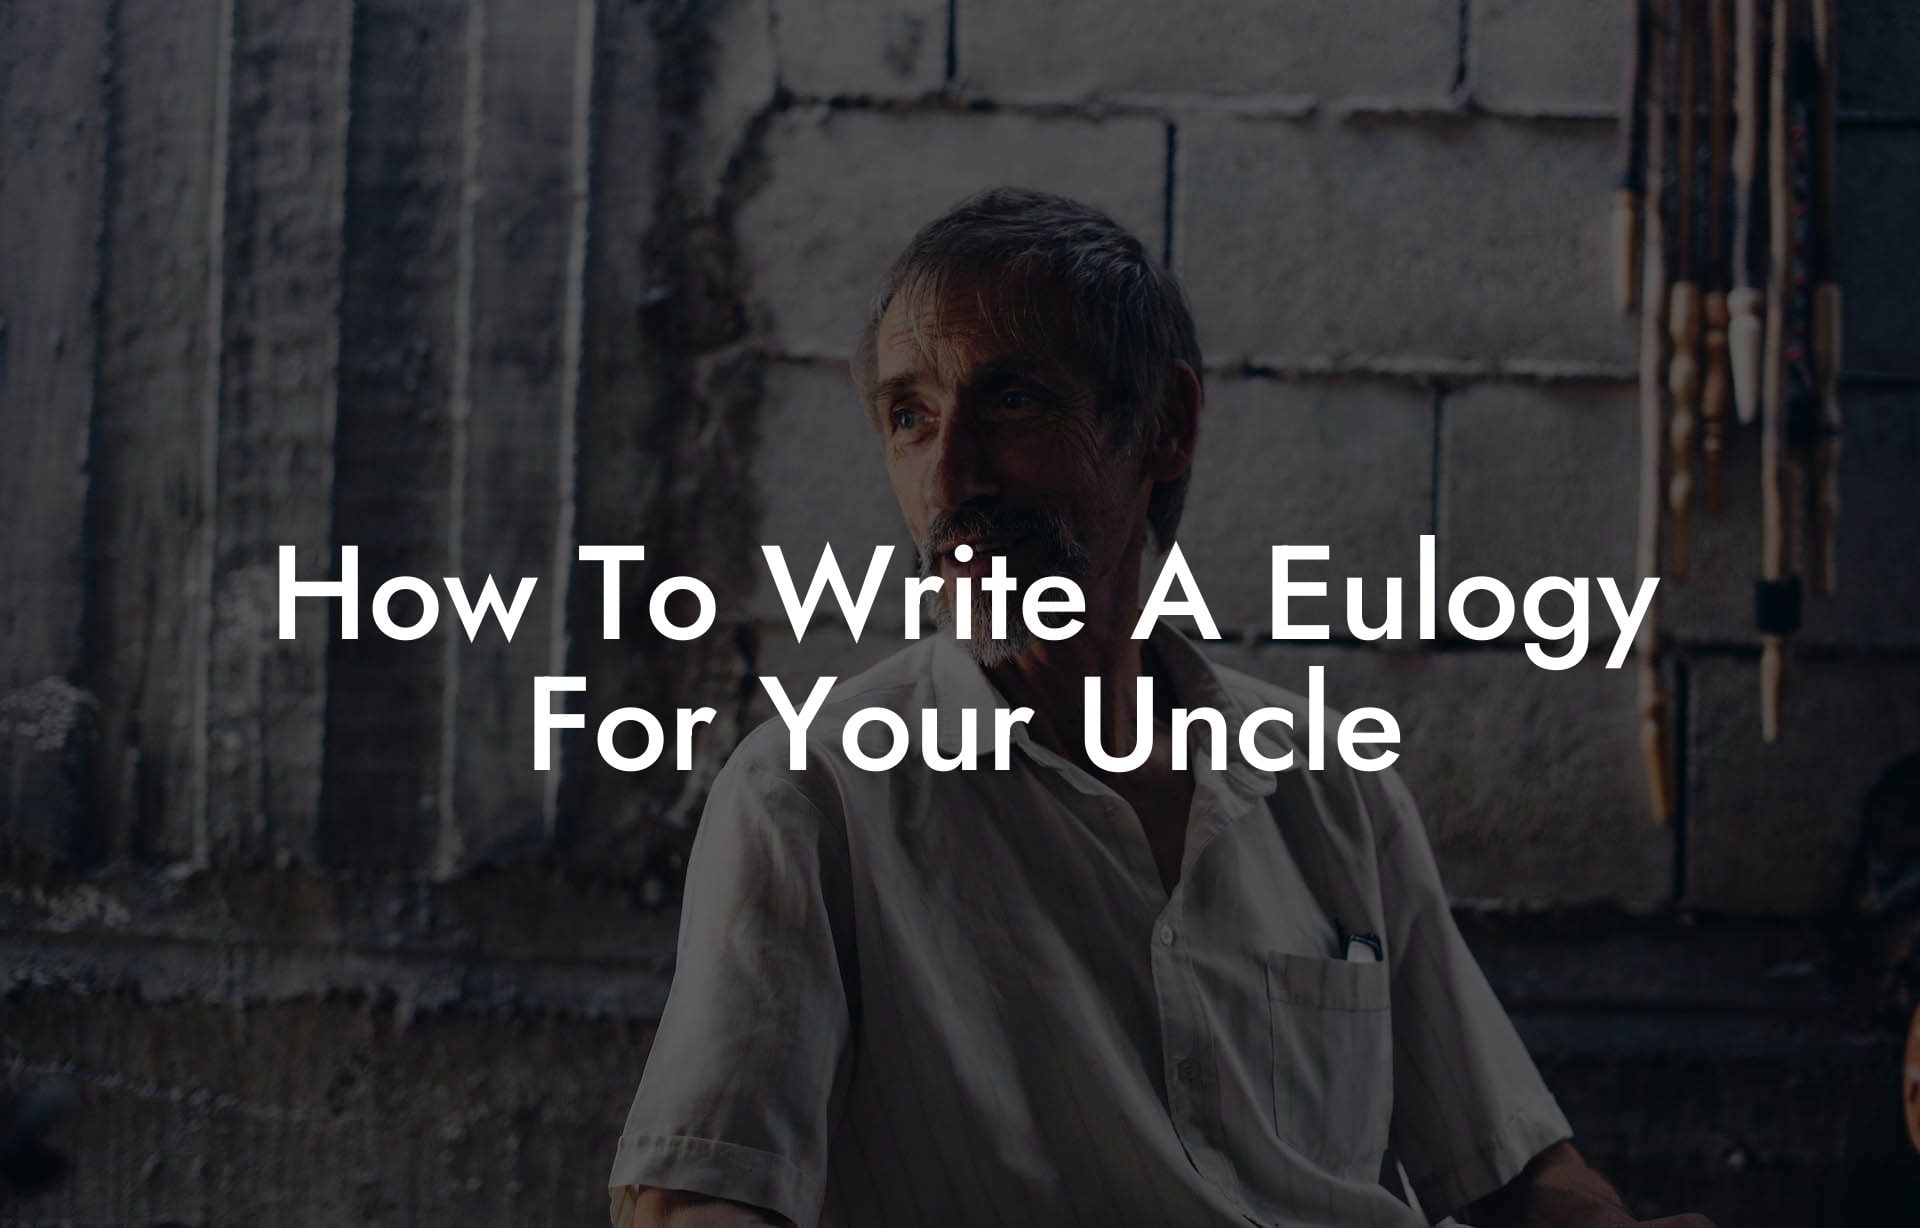 How To Write A Eulogy For Your Uncle